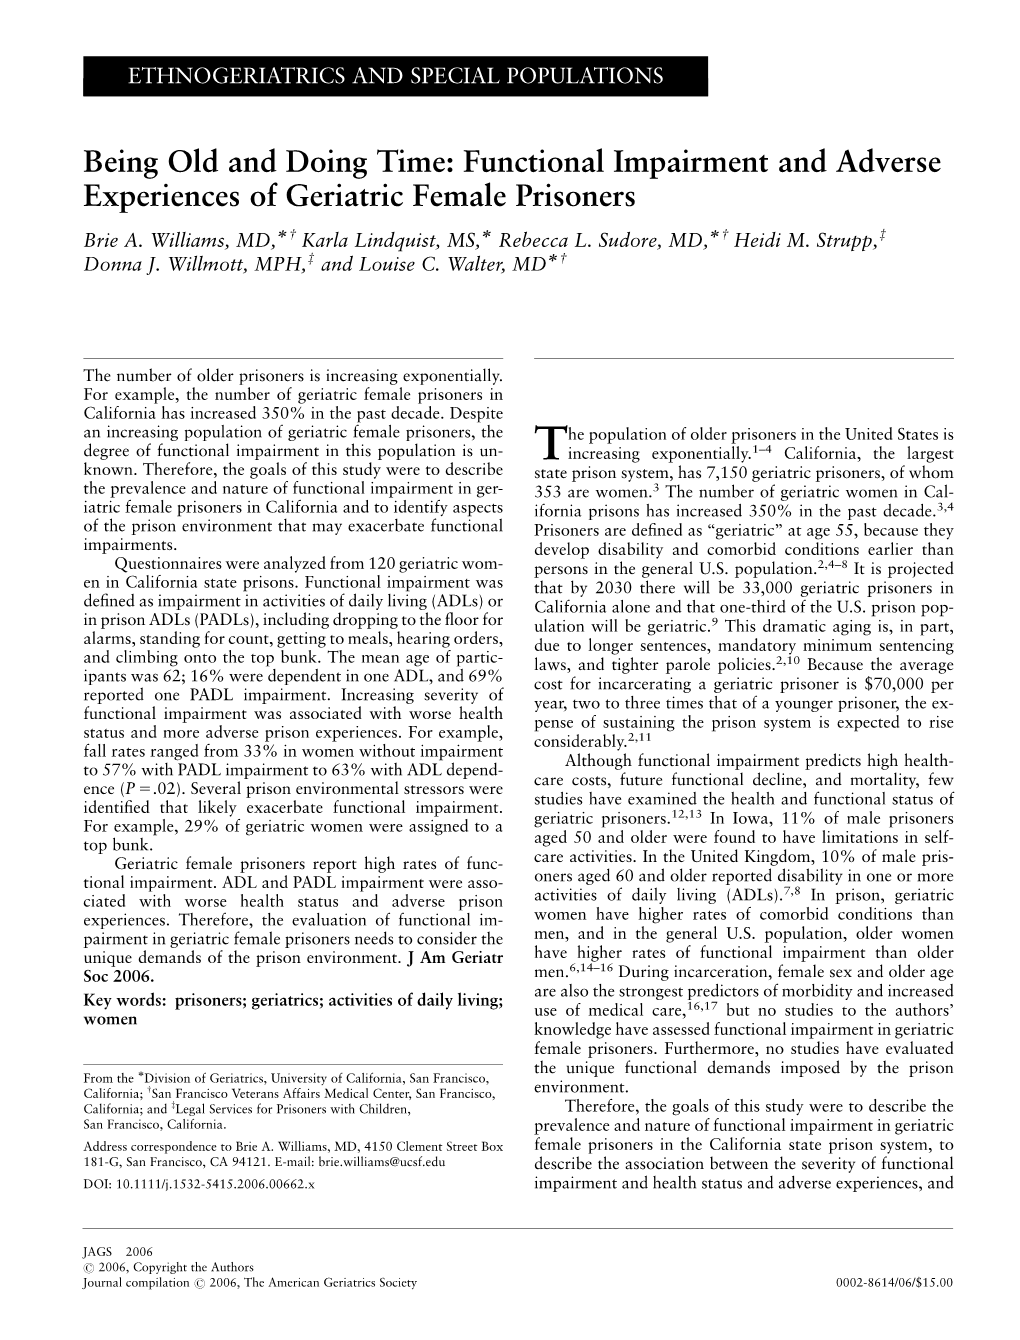 Being Old and Doing Time: Functional Impairment and Adverse Experiences of Geriatric Female Prisoners W W Brie A